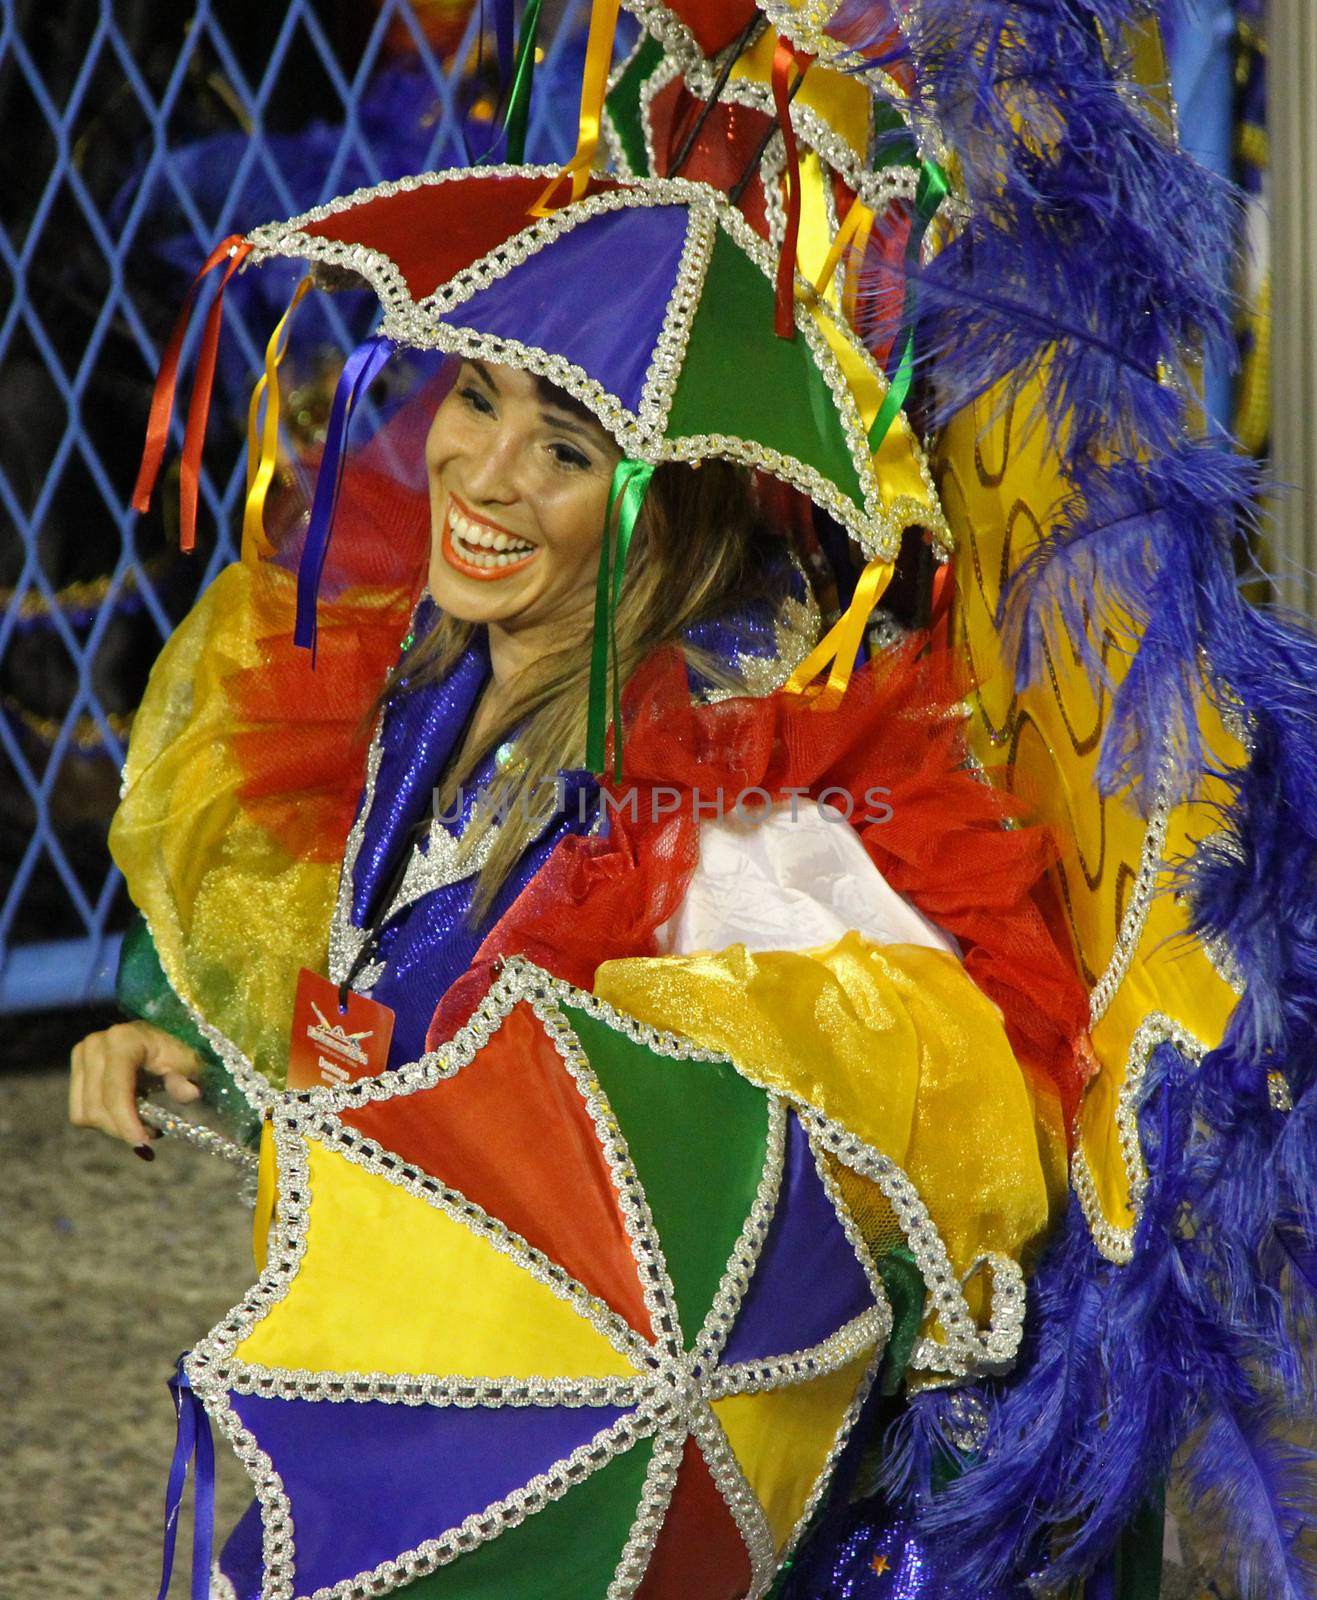 An entertainer performing at a carnaval in Rio de Janeiro, Brazil
02 Mar 2014
No model release
Editorial only